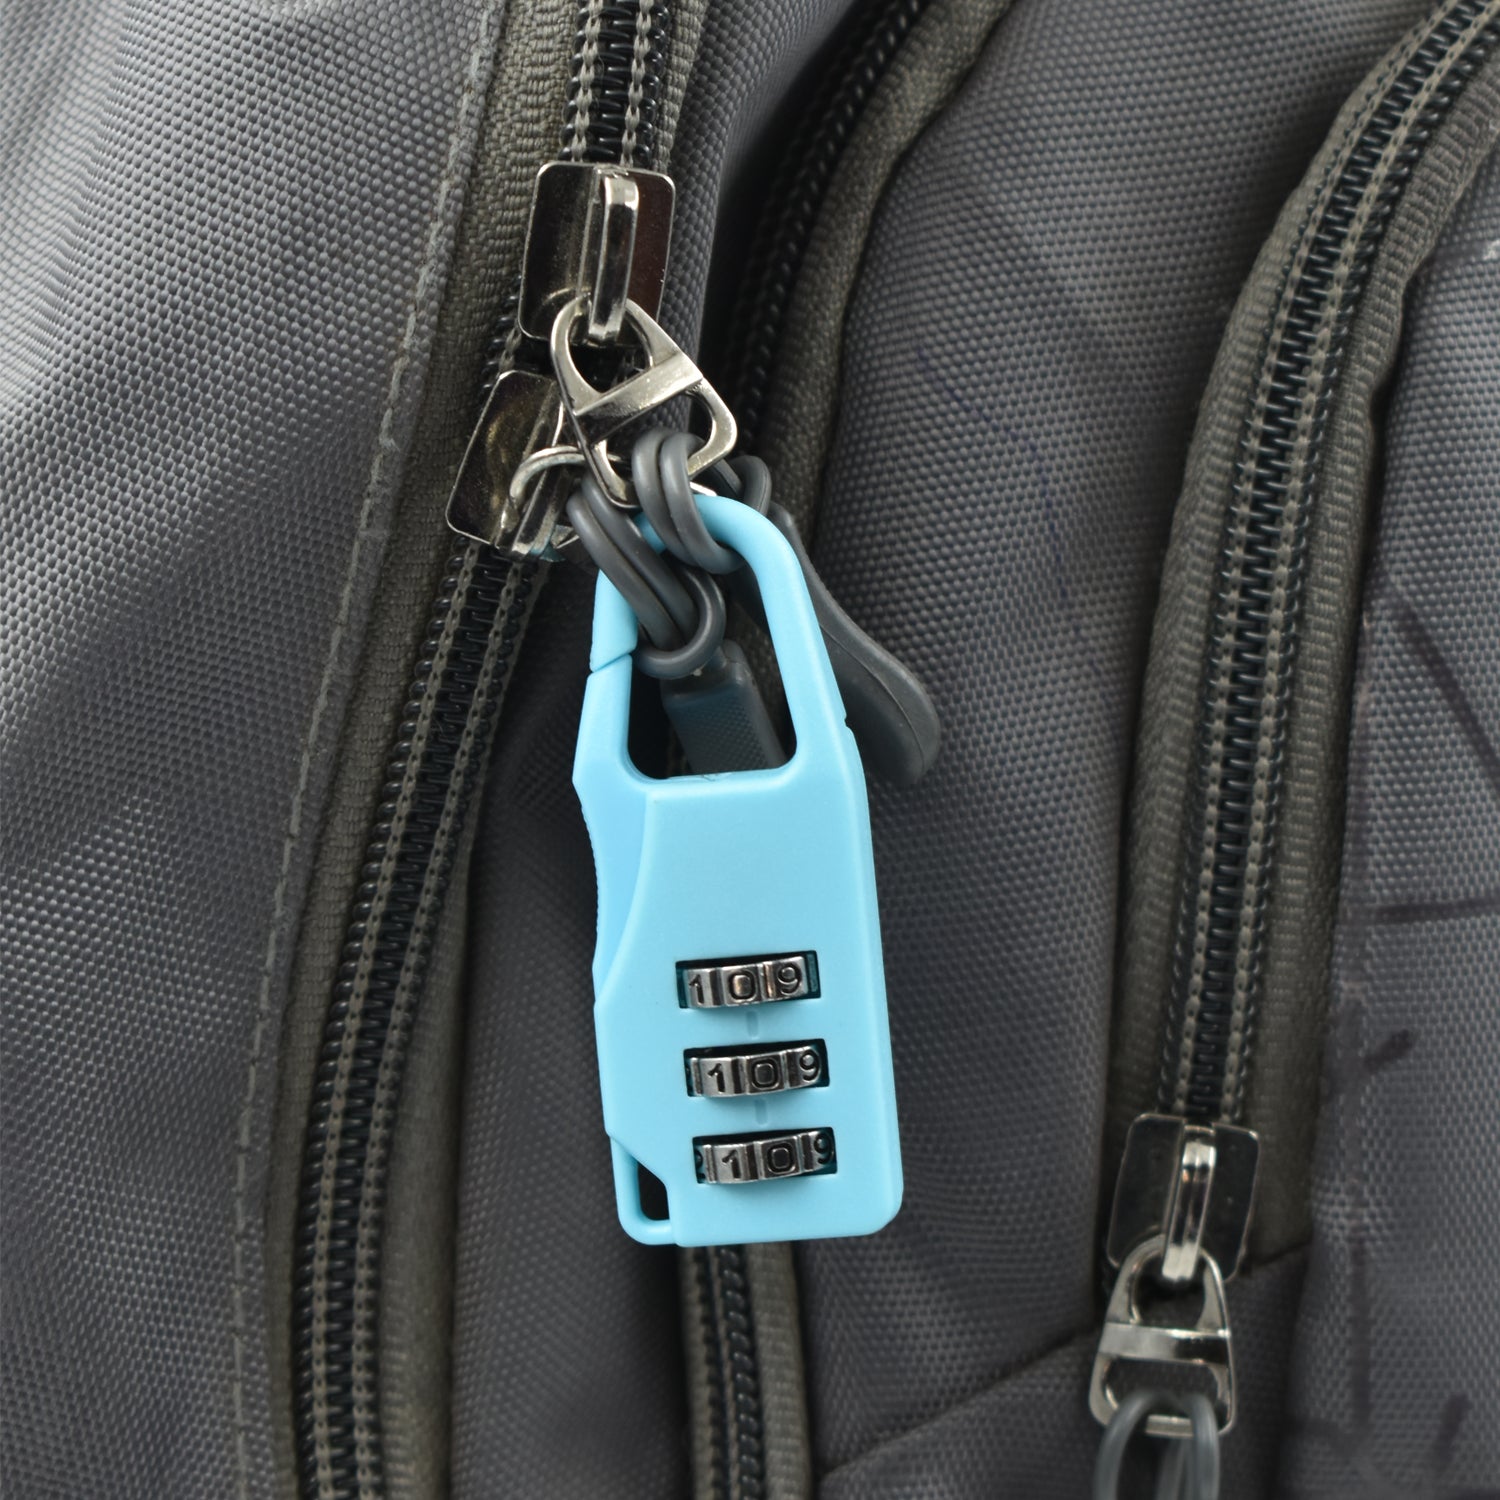 6109 3 Digit luggage Lock and tool used widely in all security purposes of luggage items and materials. DeoDap